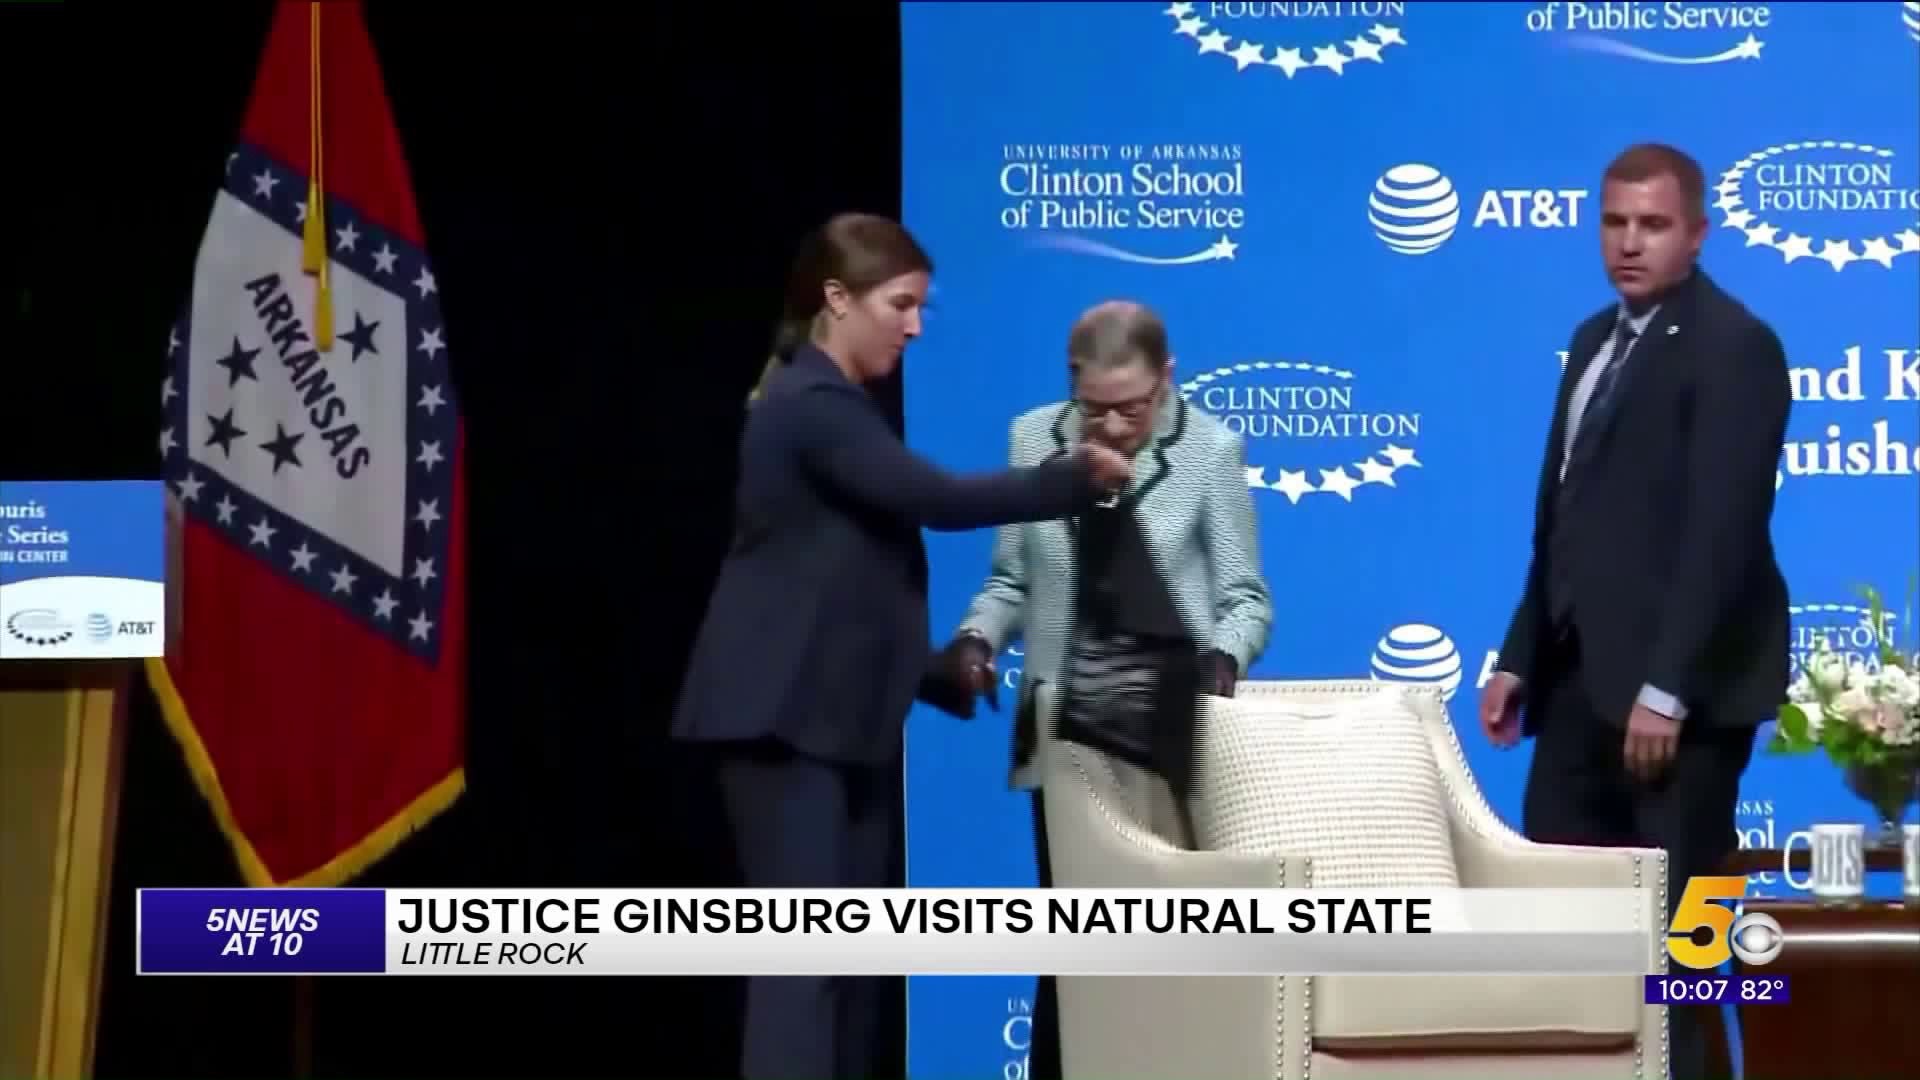 Justice Ginsburg Visits The Natural State